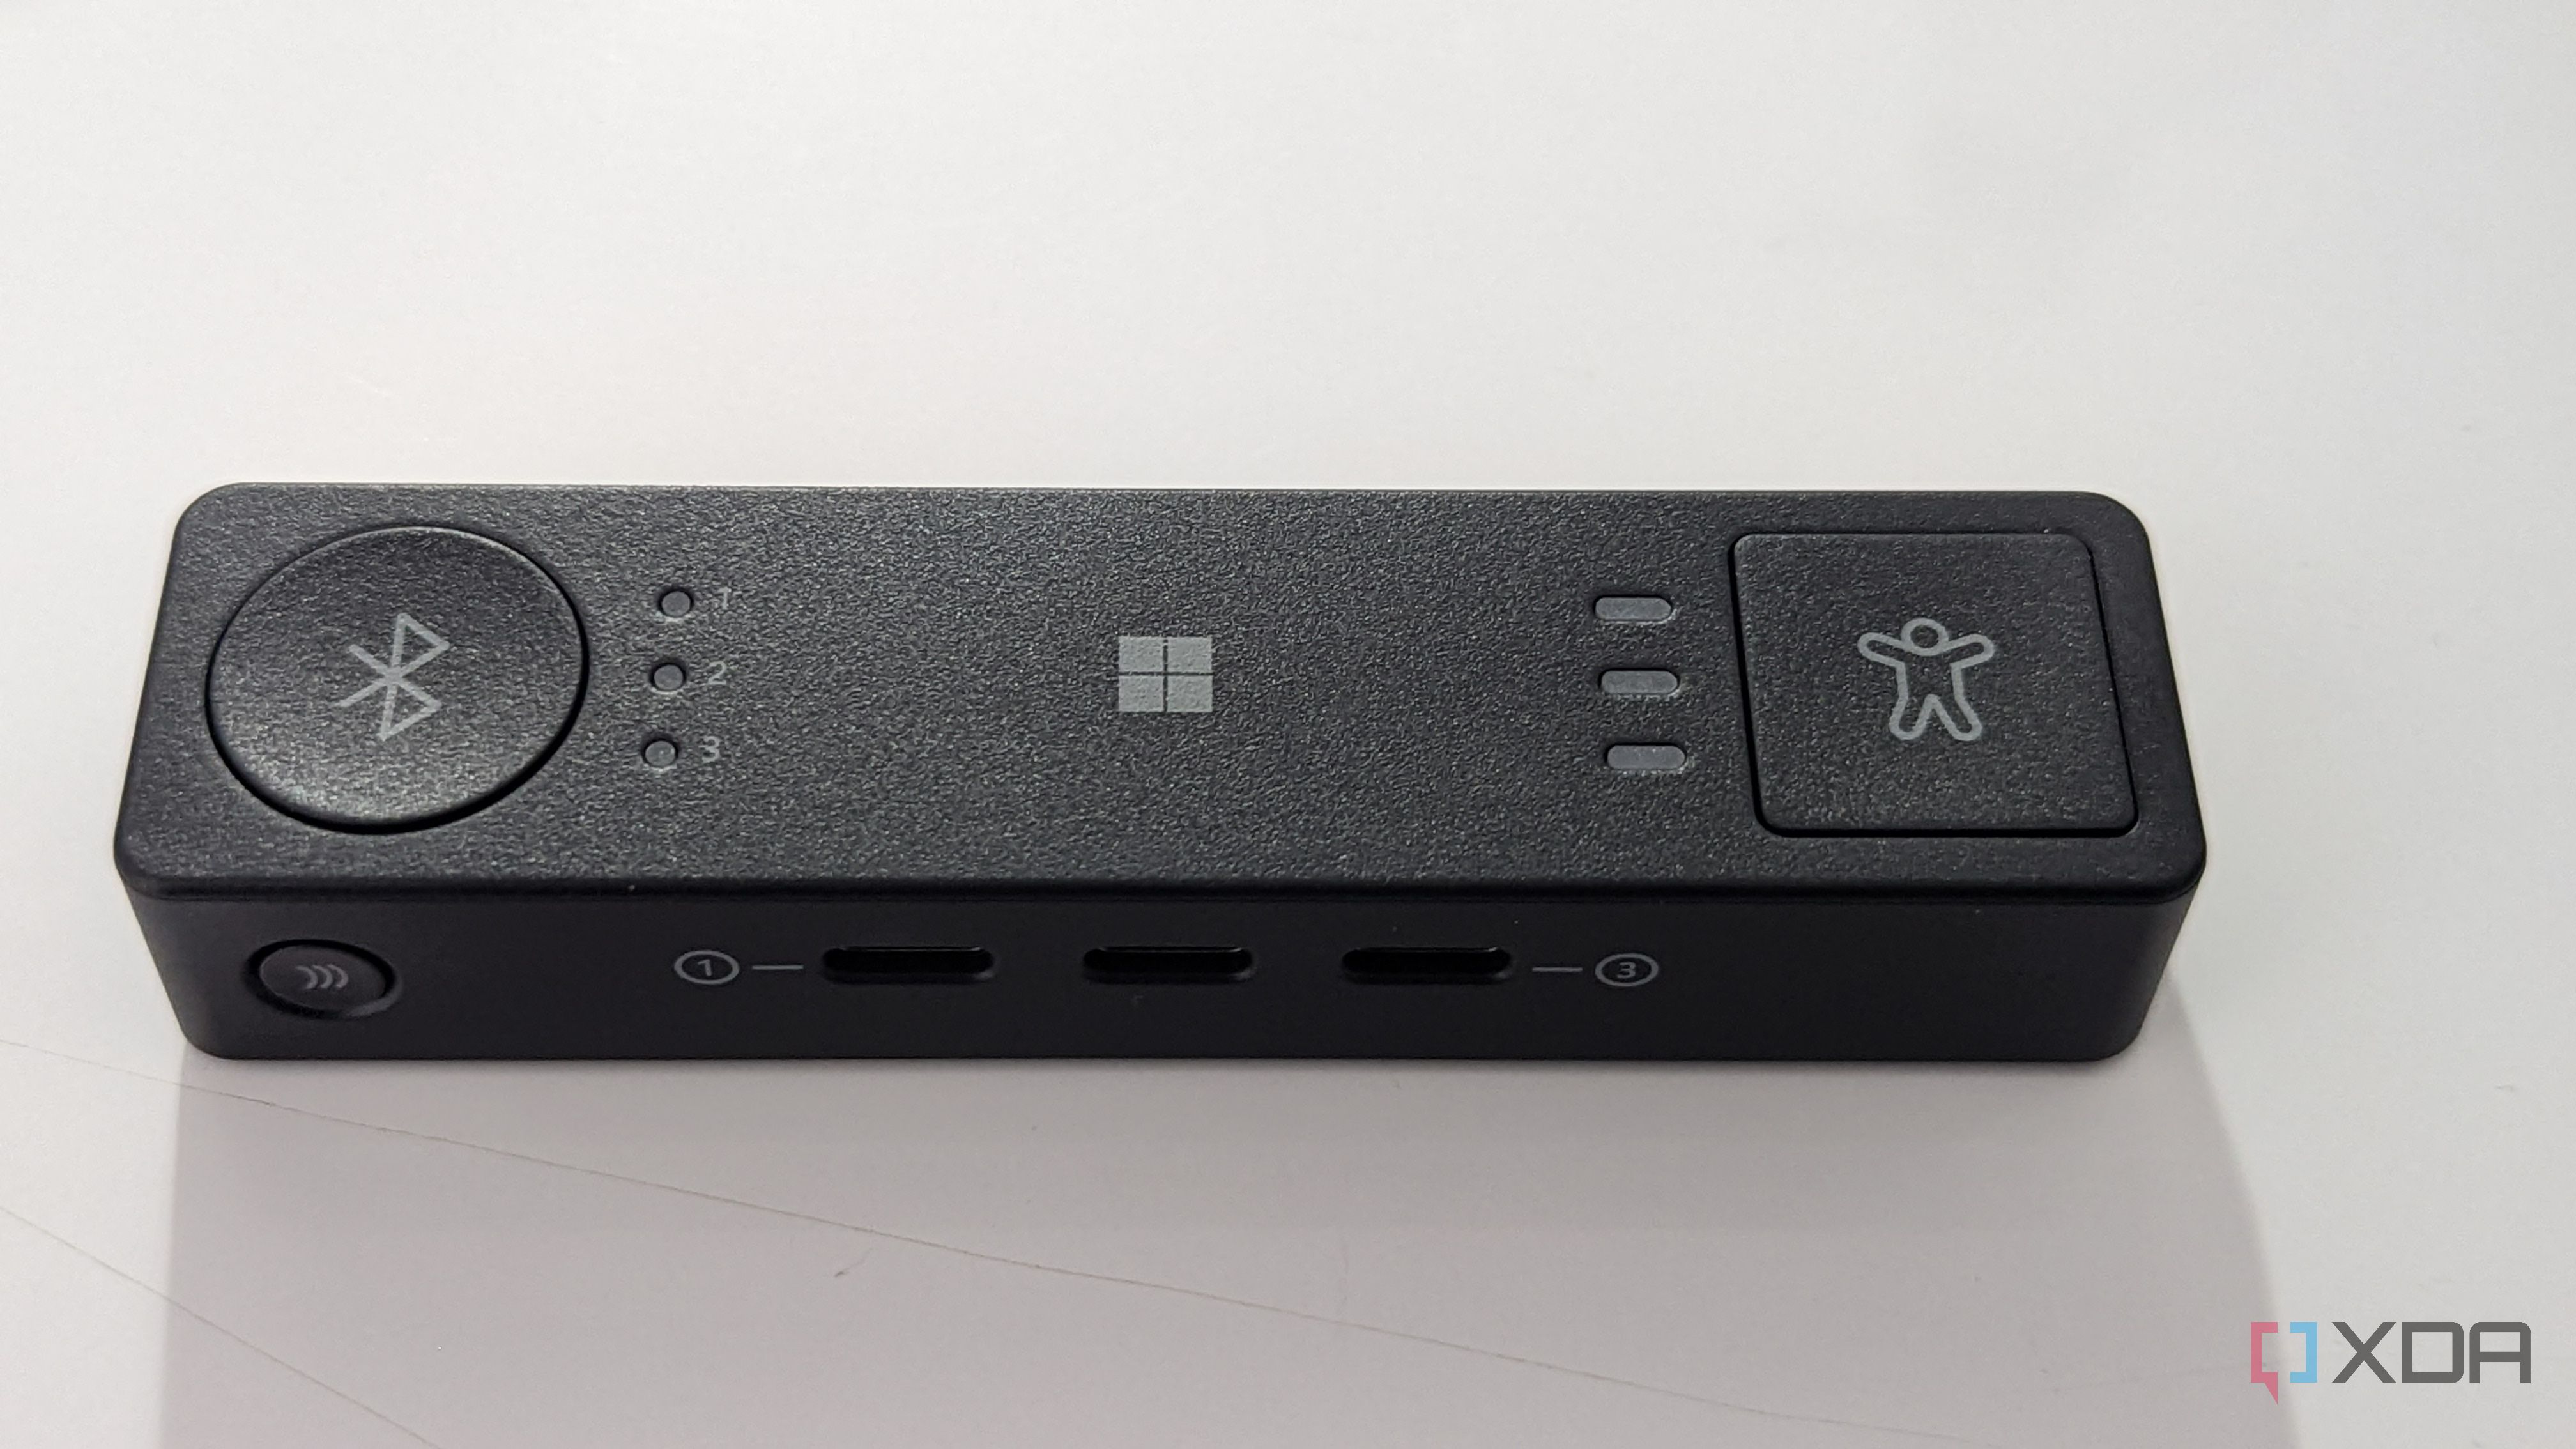 The front of the Microsoft Adaptive Hub showing the buttons and ports.